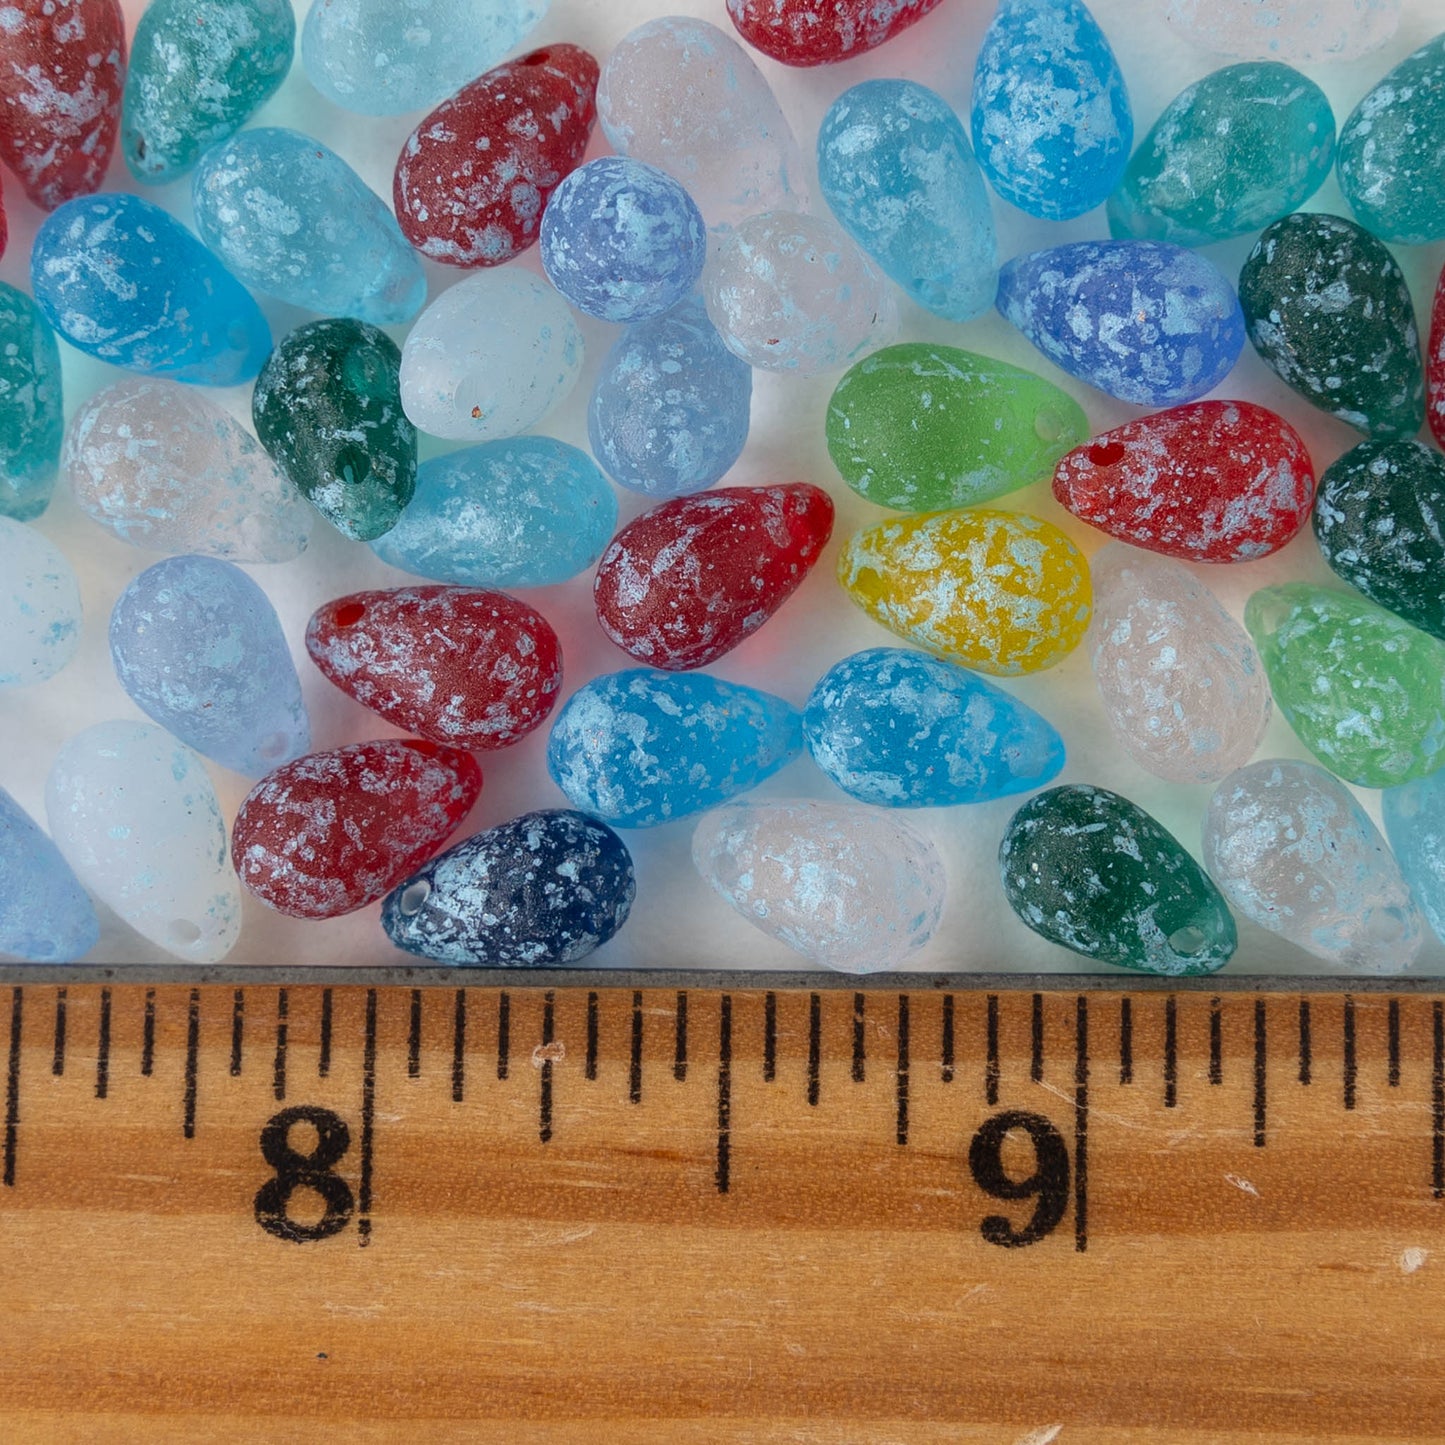 6x9mm Glass Teardrop Beads - Colorful Mix - 30 Beads